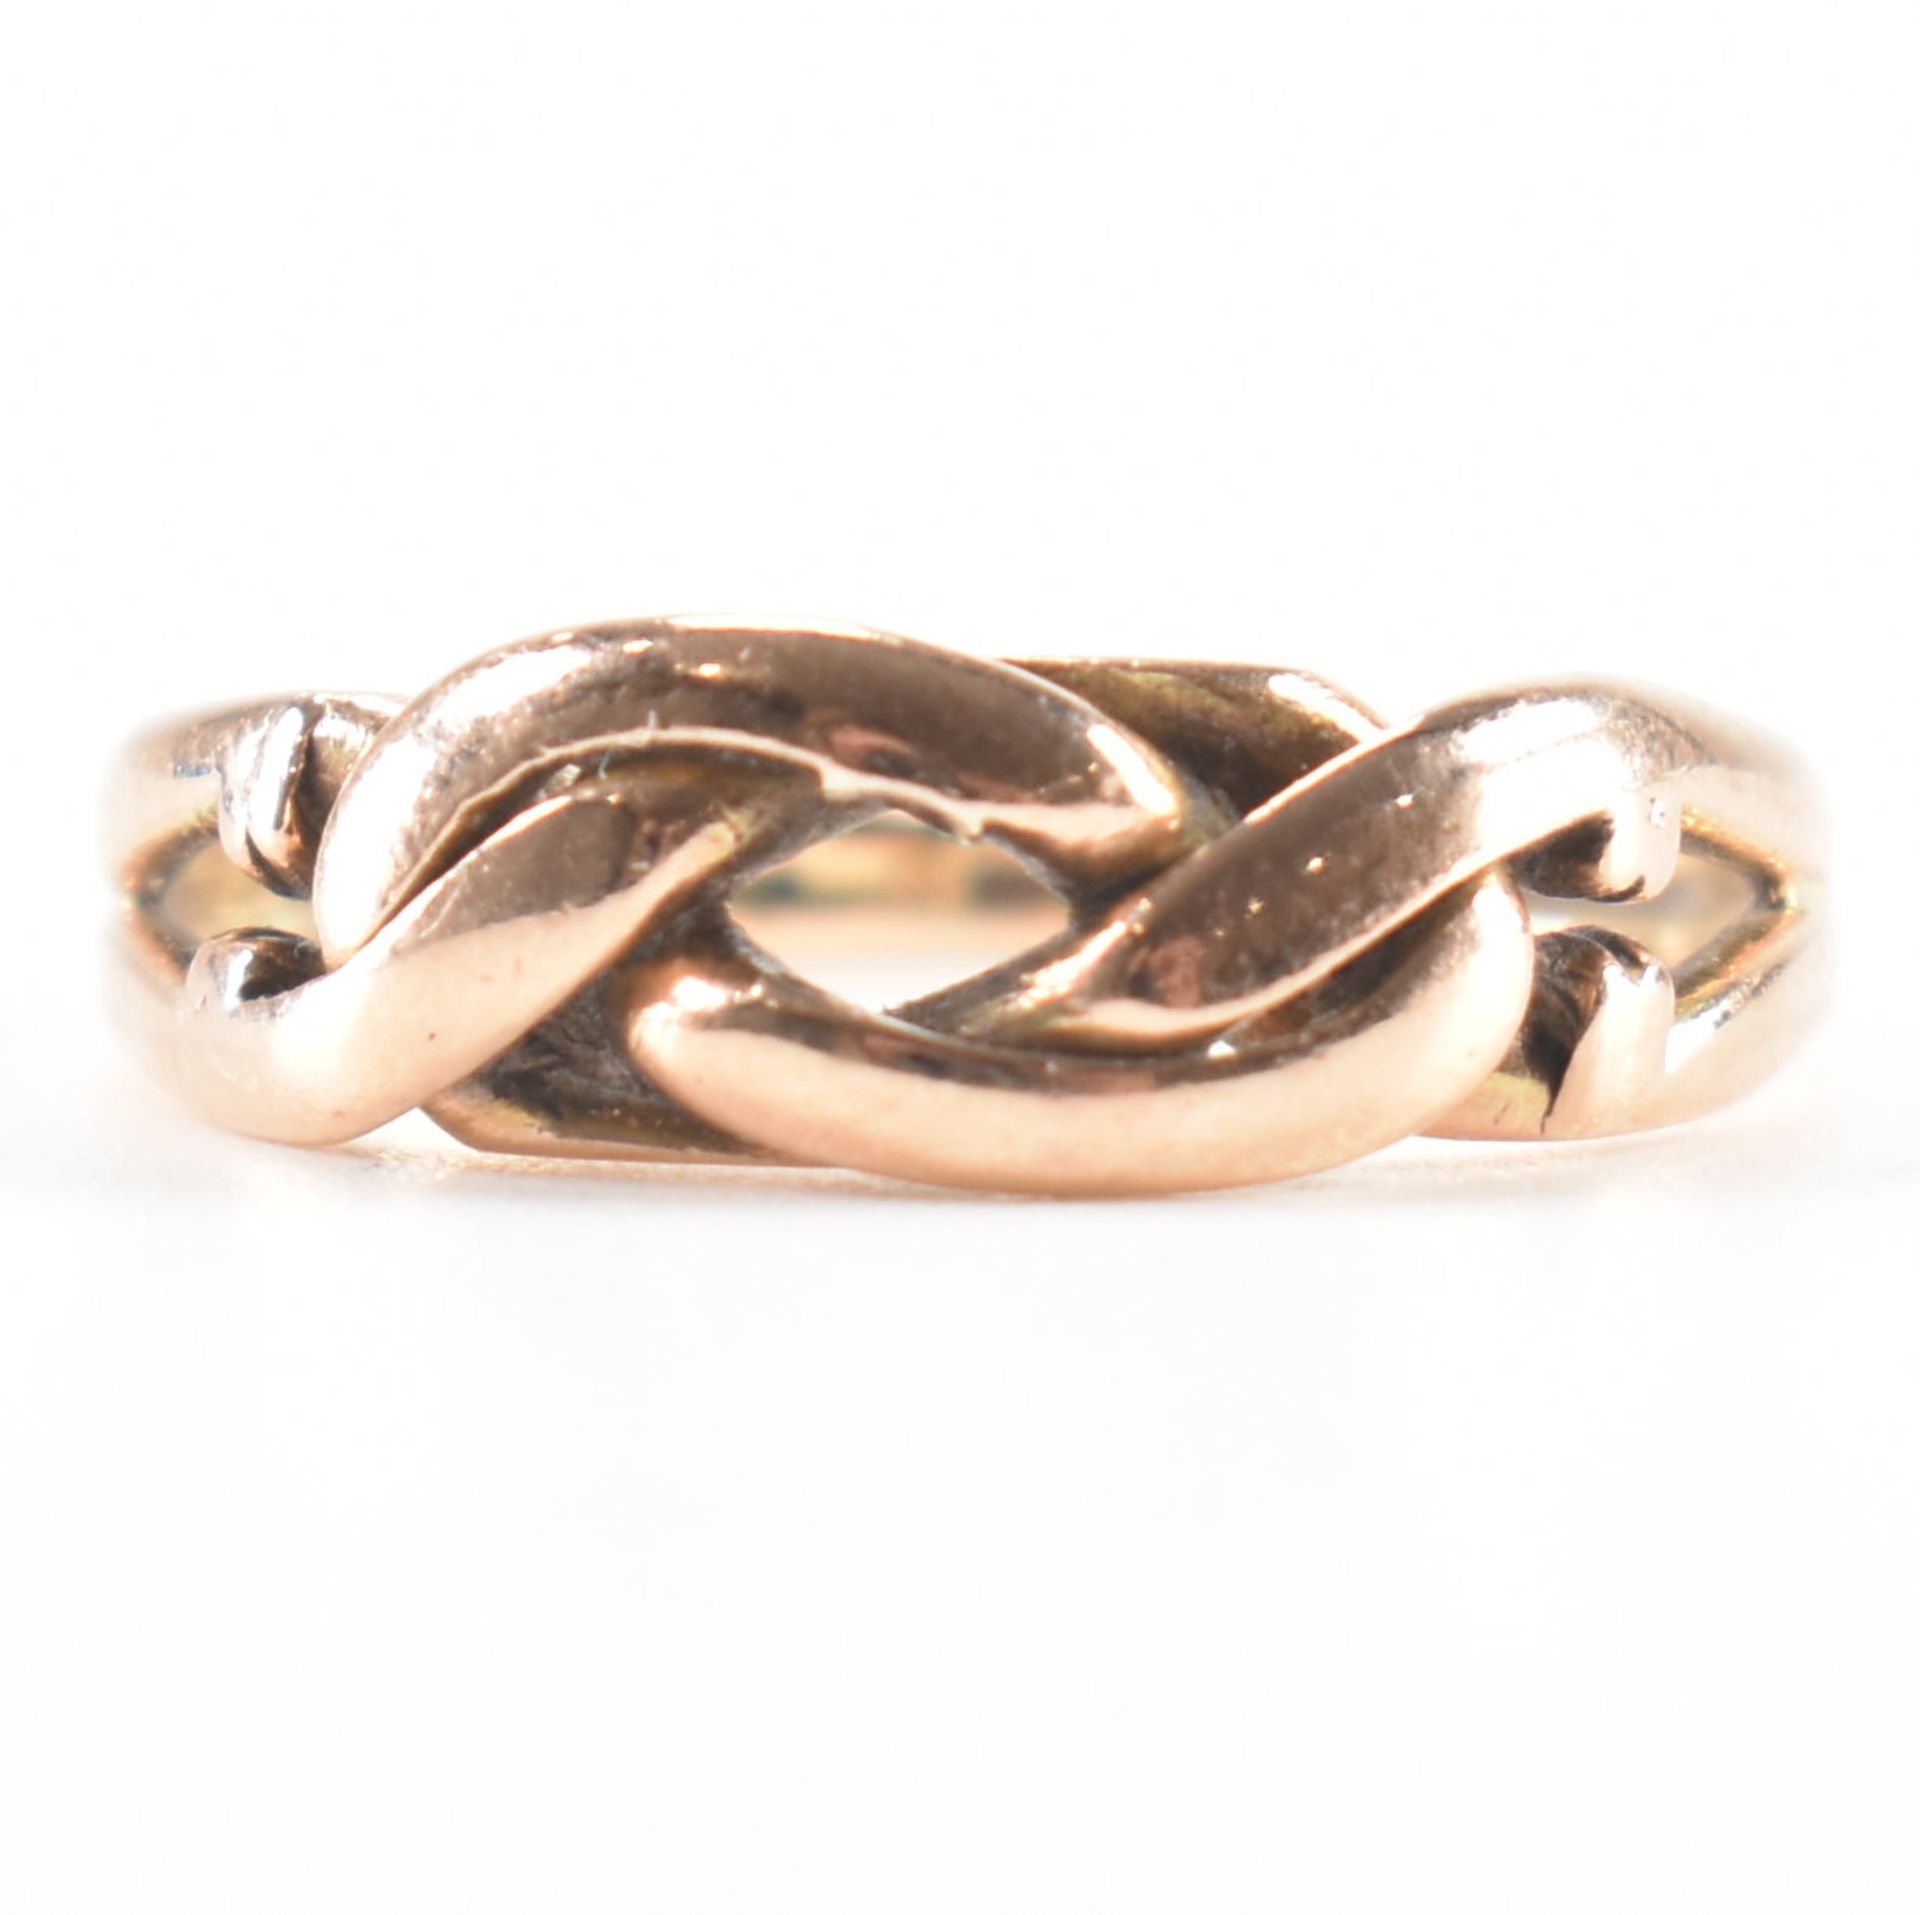 HALLMARKED 9CT ROSE GOLD KNOT RING